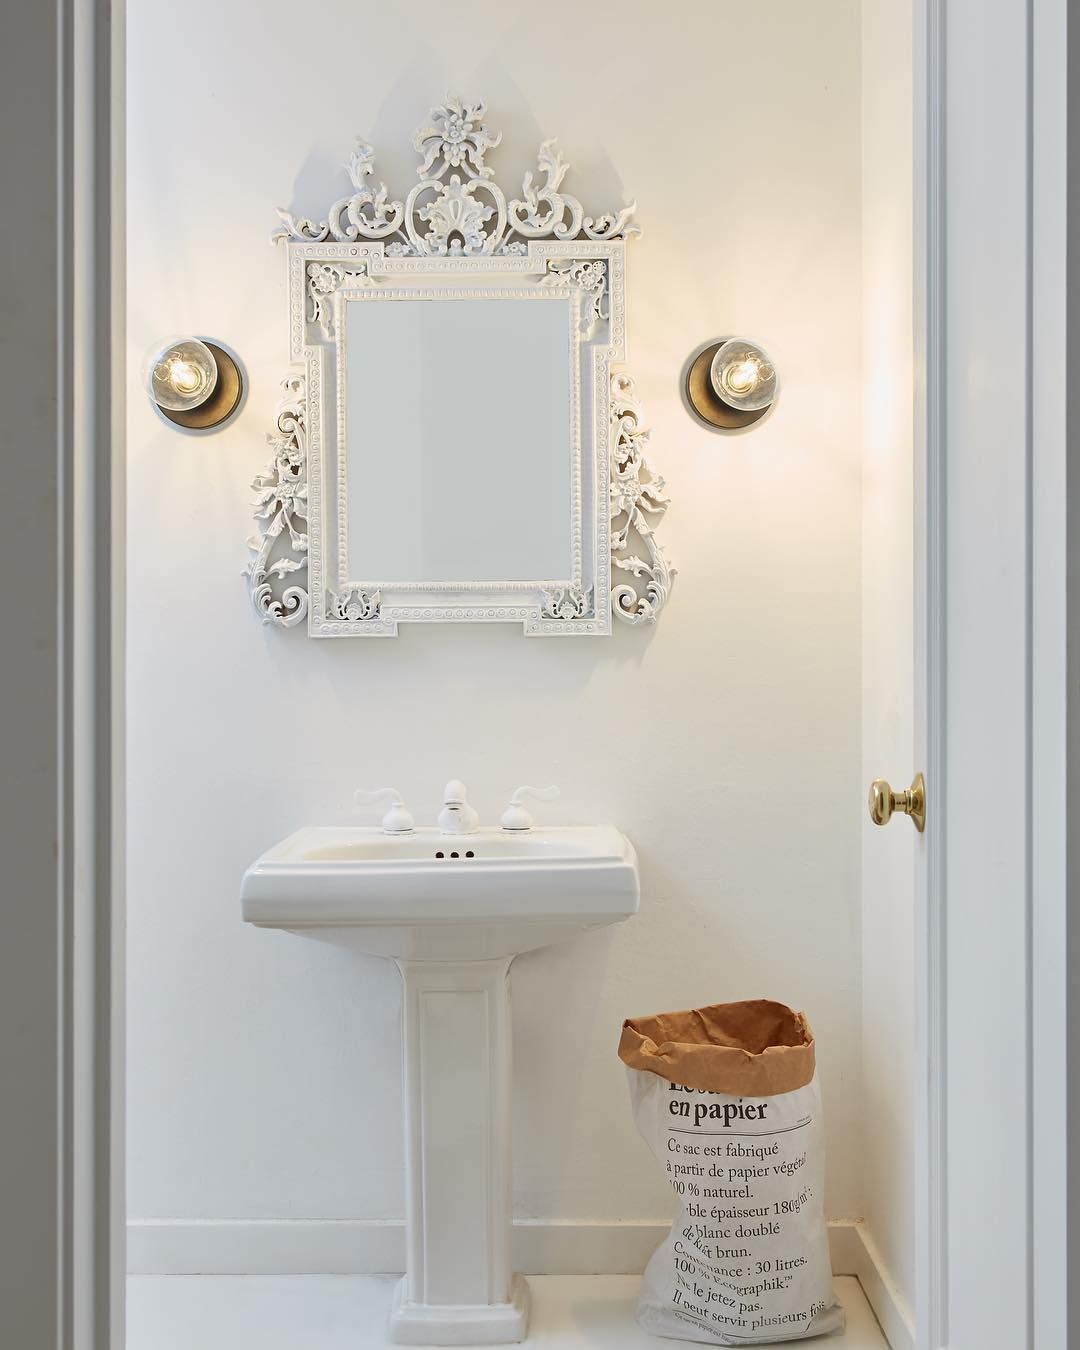 18 Bathroom Decorating Ideas on a Budget   Chic and Affordable ...